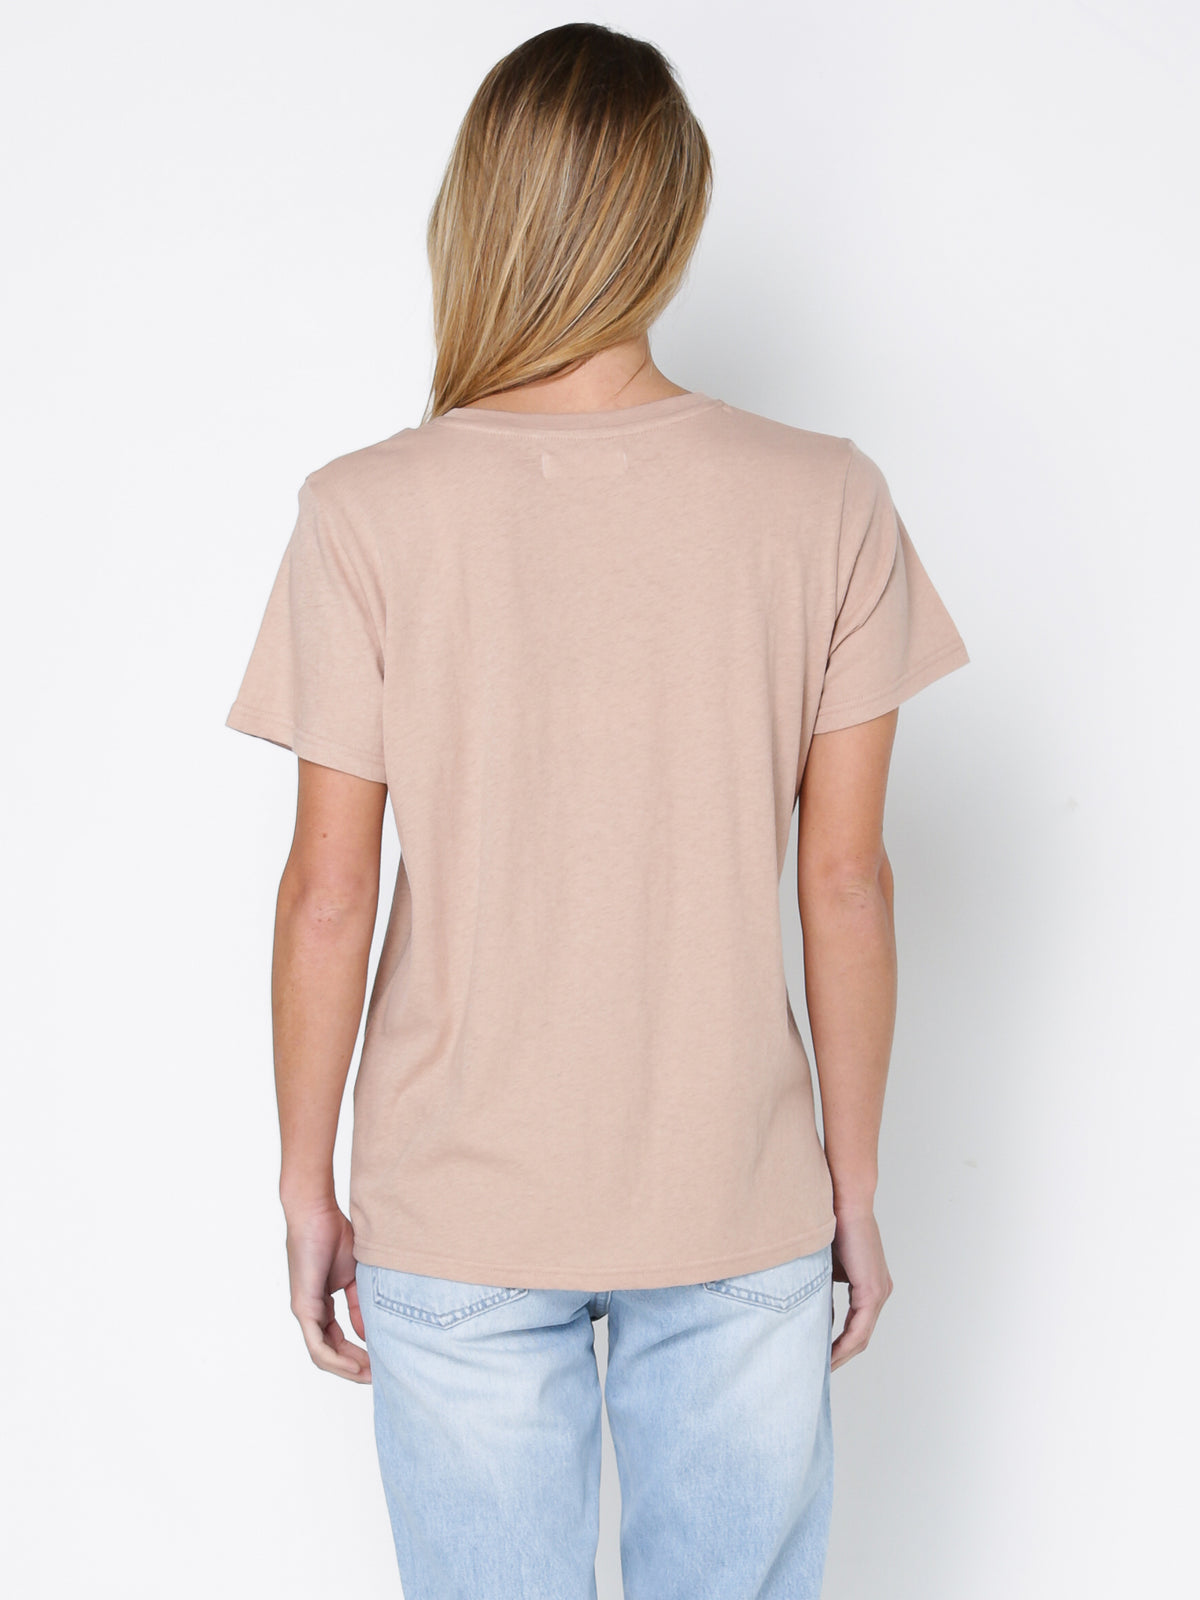 Collate T-Shirt in Dusk Pink